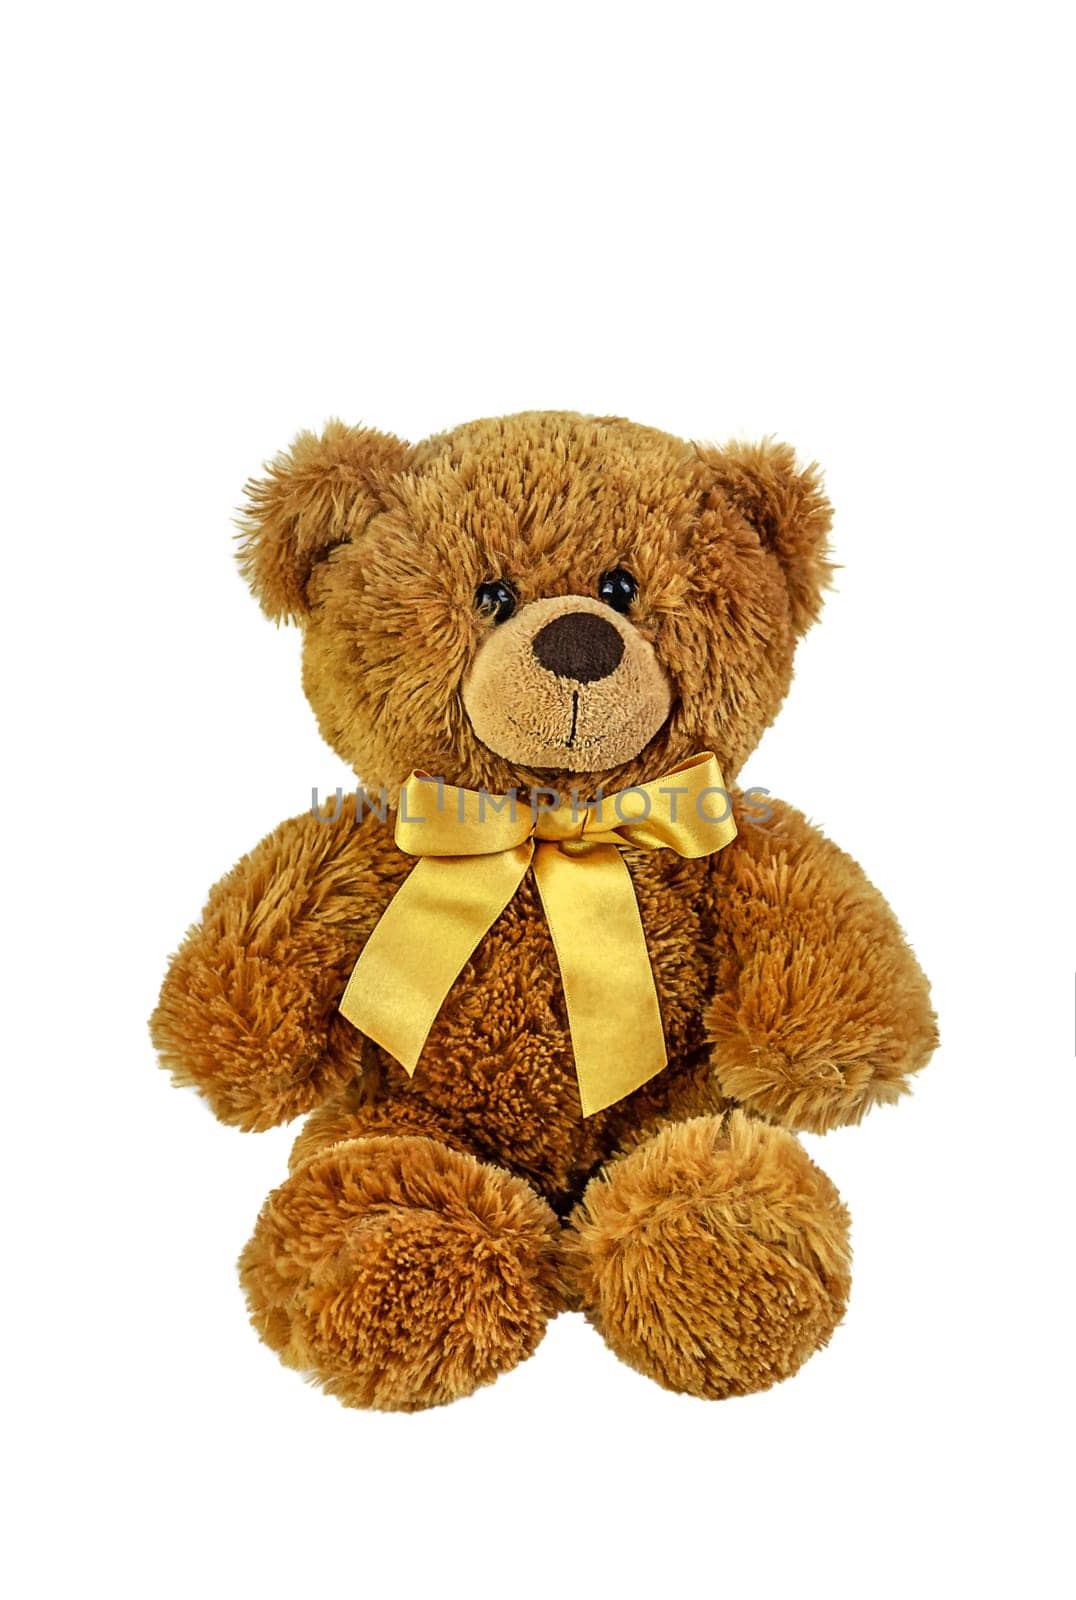 Teddy bear on white background isolate. Selective focus. Holiday.